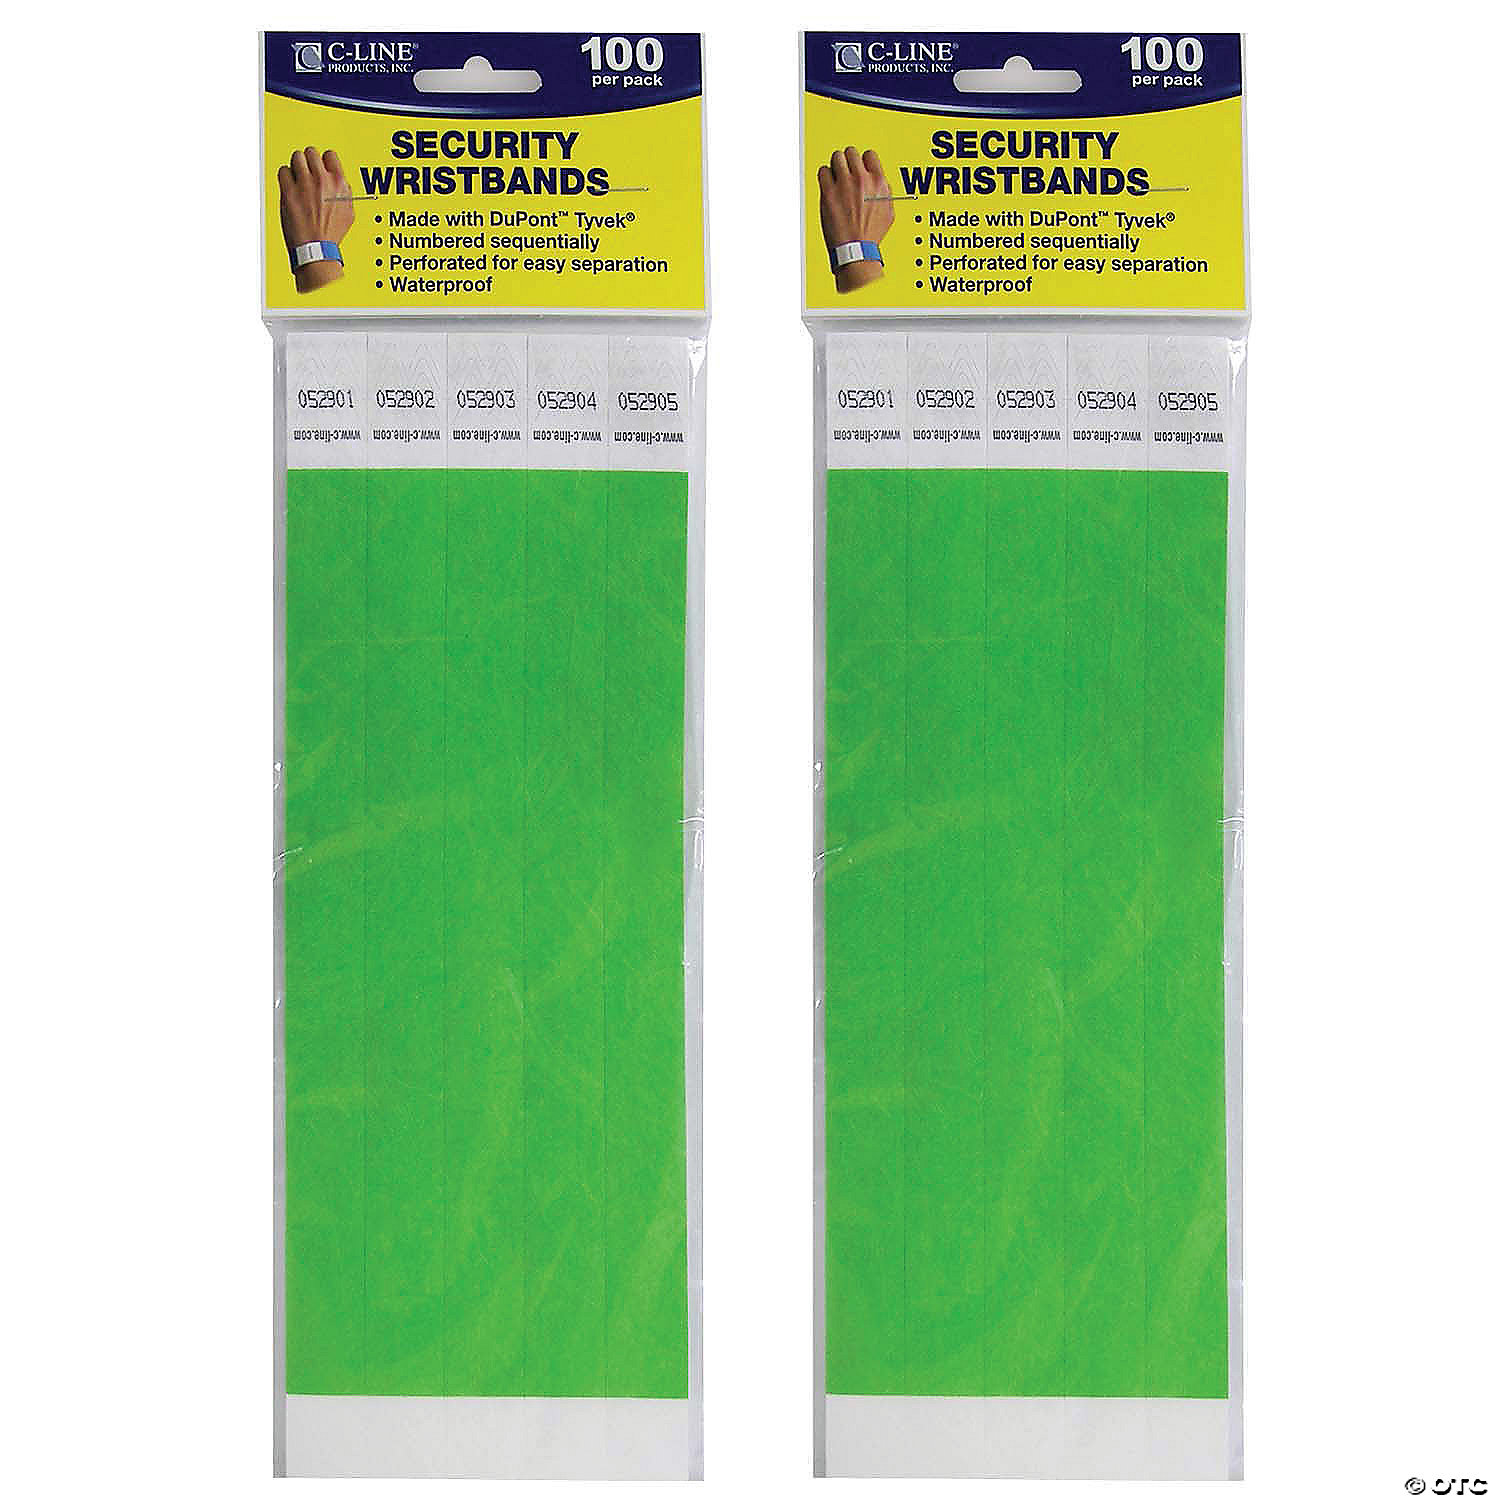 clumsy suitcase Occasionally C-Line DuPont Tyvek Security Wristbands, Green, 100 Per Pack, 2 Packs |  Oriental Trading